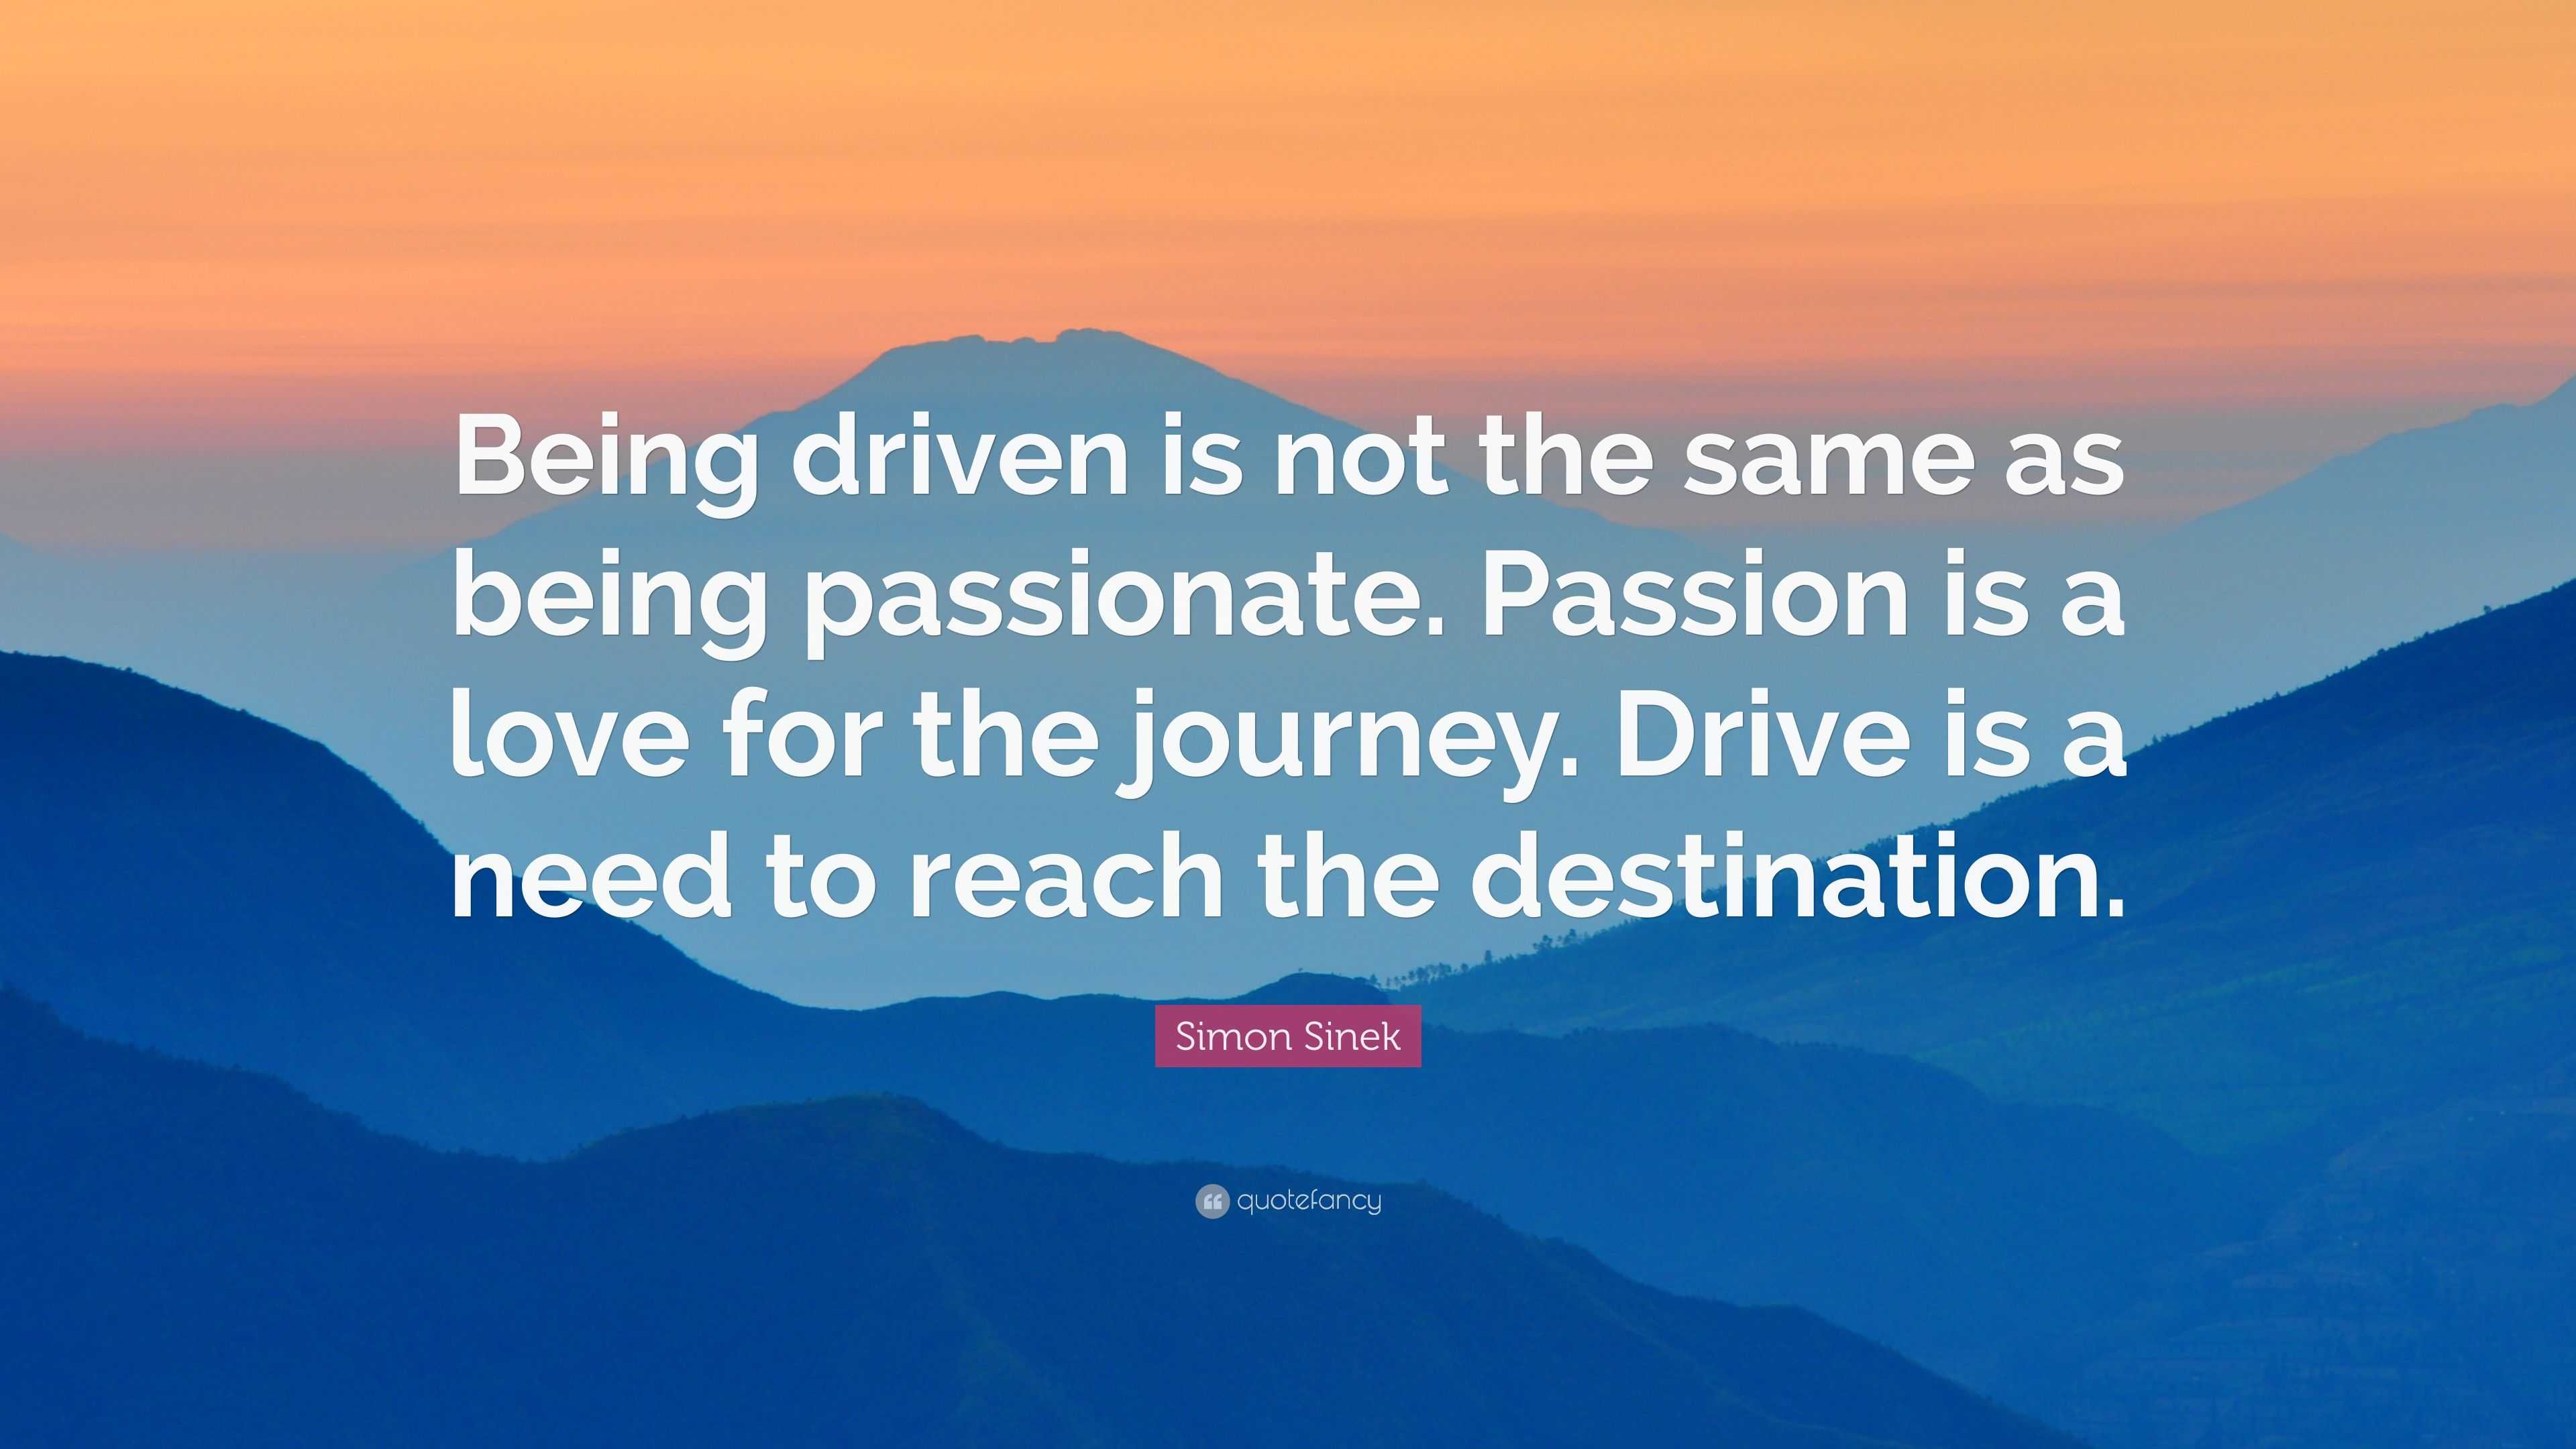 Simon Sinek Quote: “Being driven is not the same as being passionate